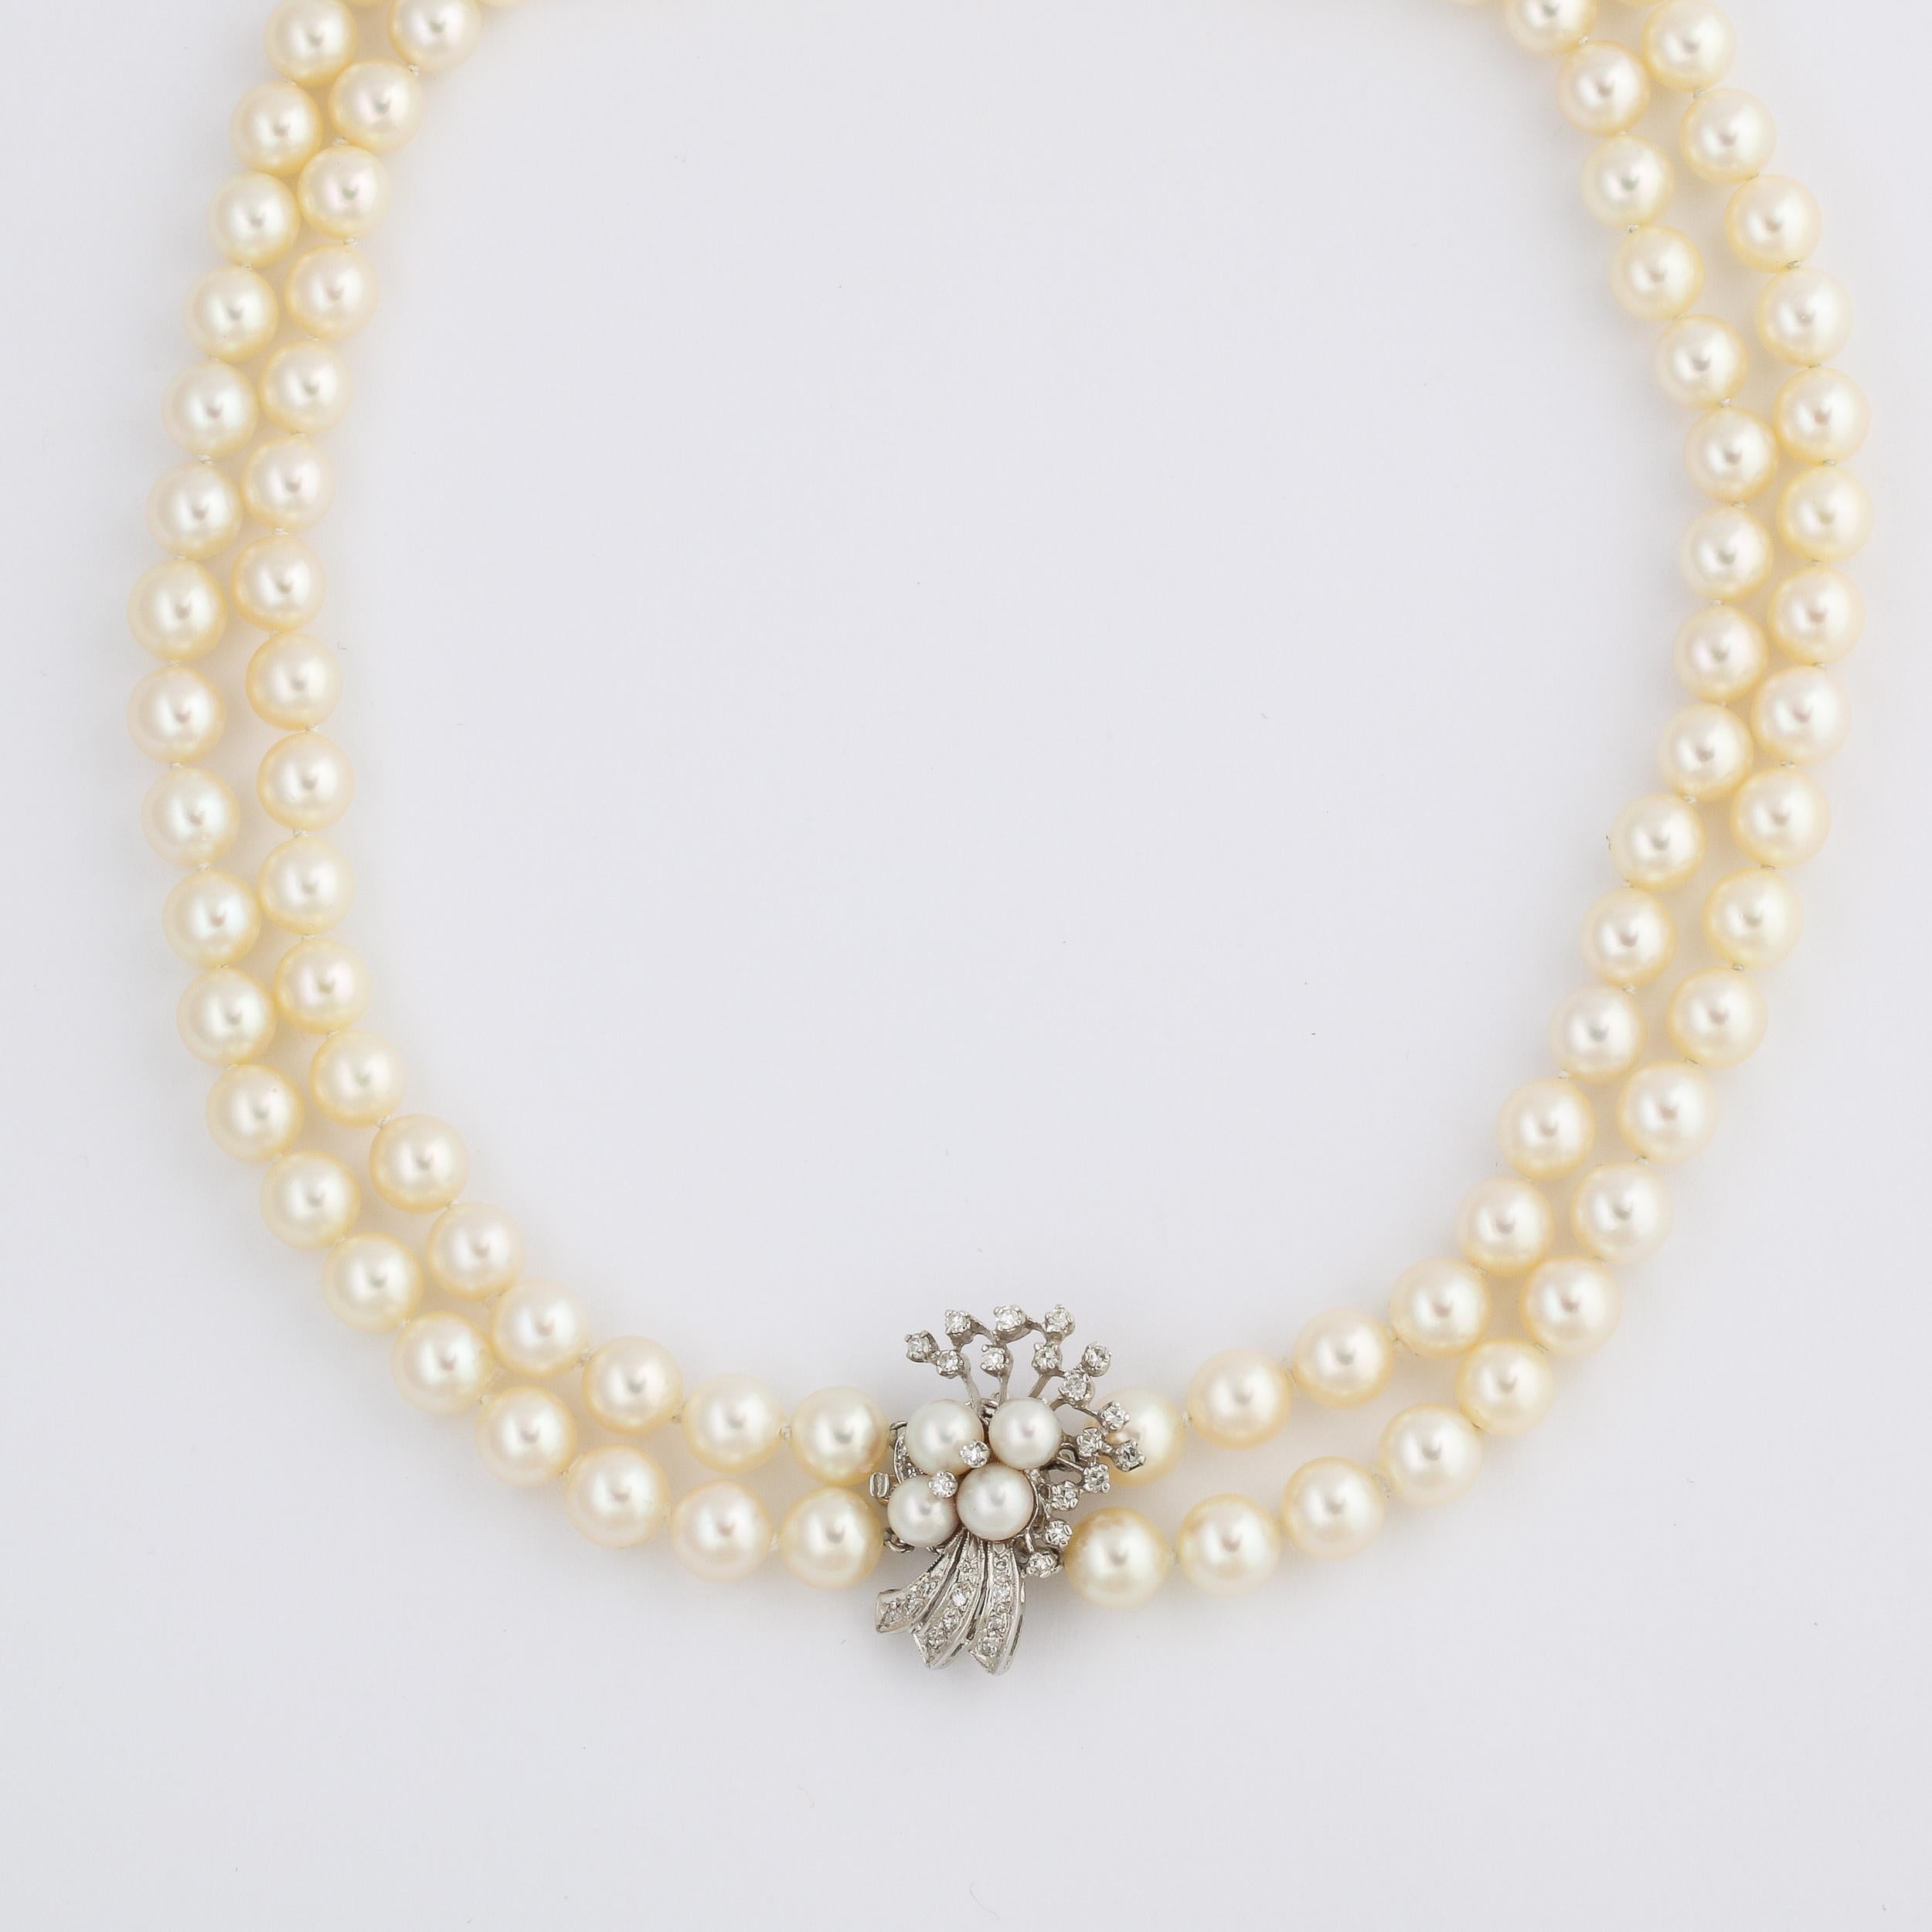 Double Strand Pearl Necklace with A White Gold , Diamond & Pearl Clasp For Sale 1